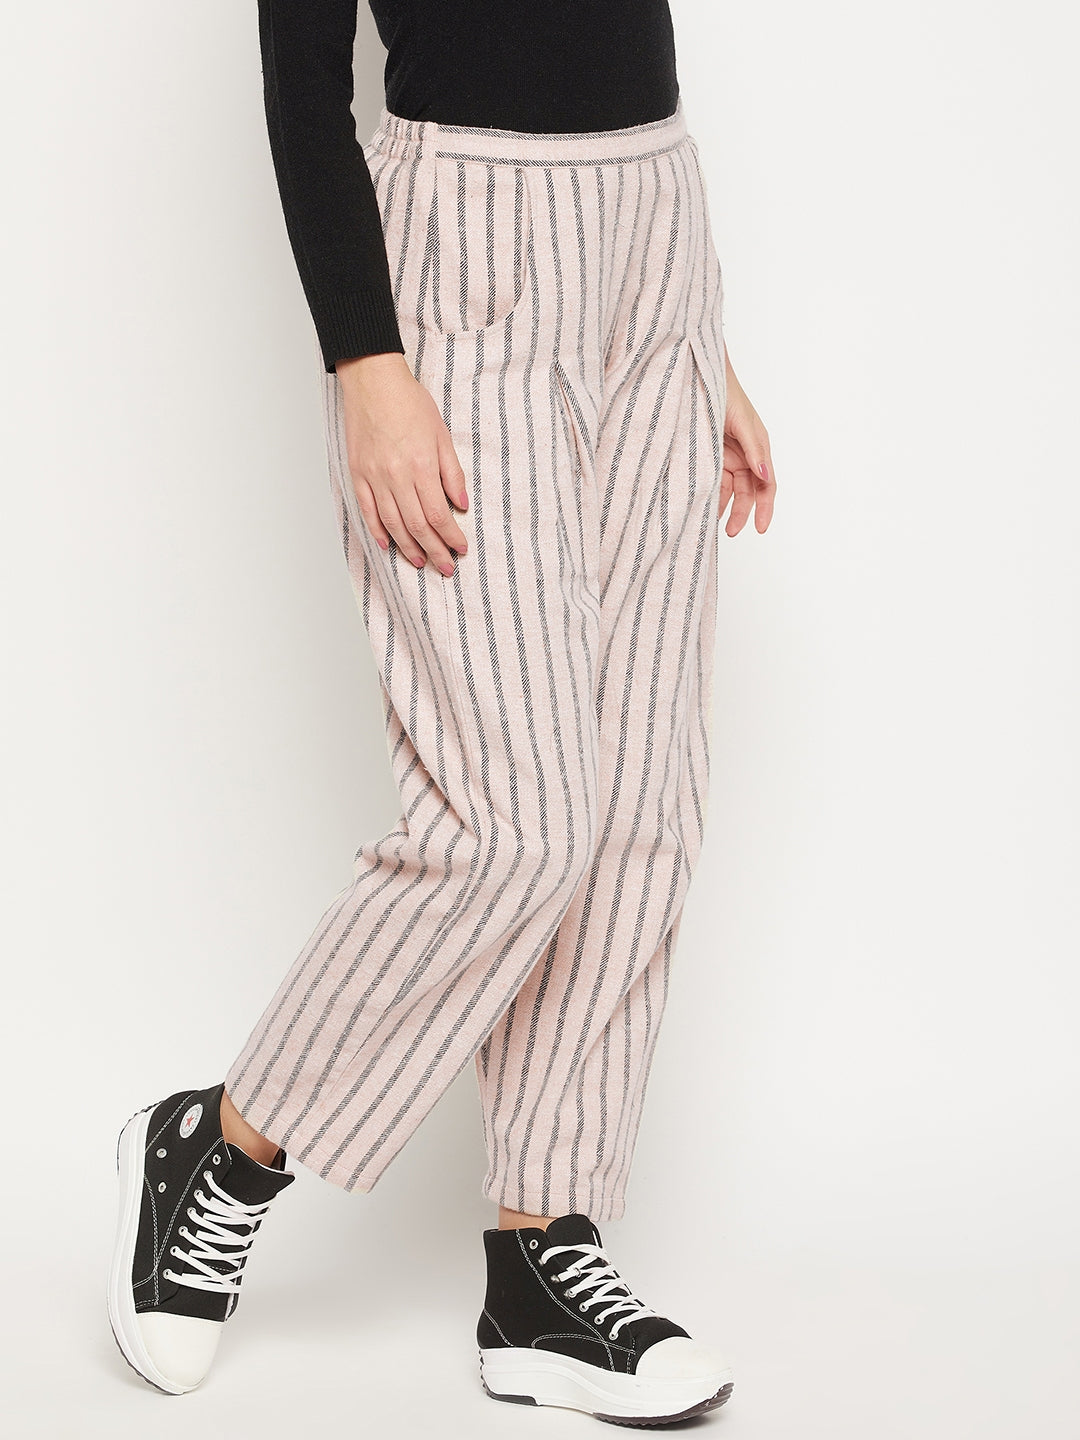 Women Striped Relaxed Flared Wrinkle Free Pleated Cotton Trousers